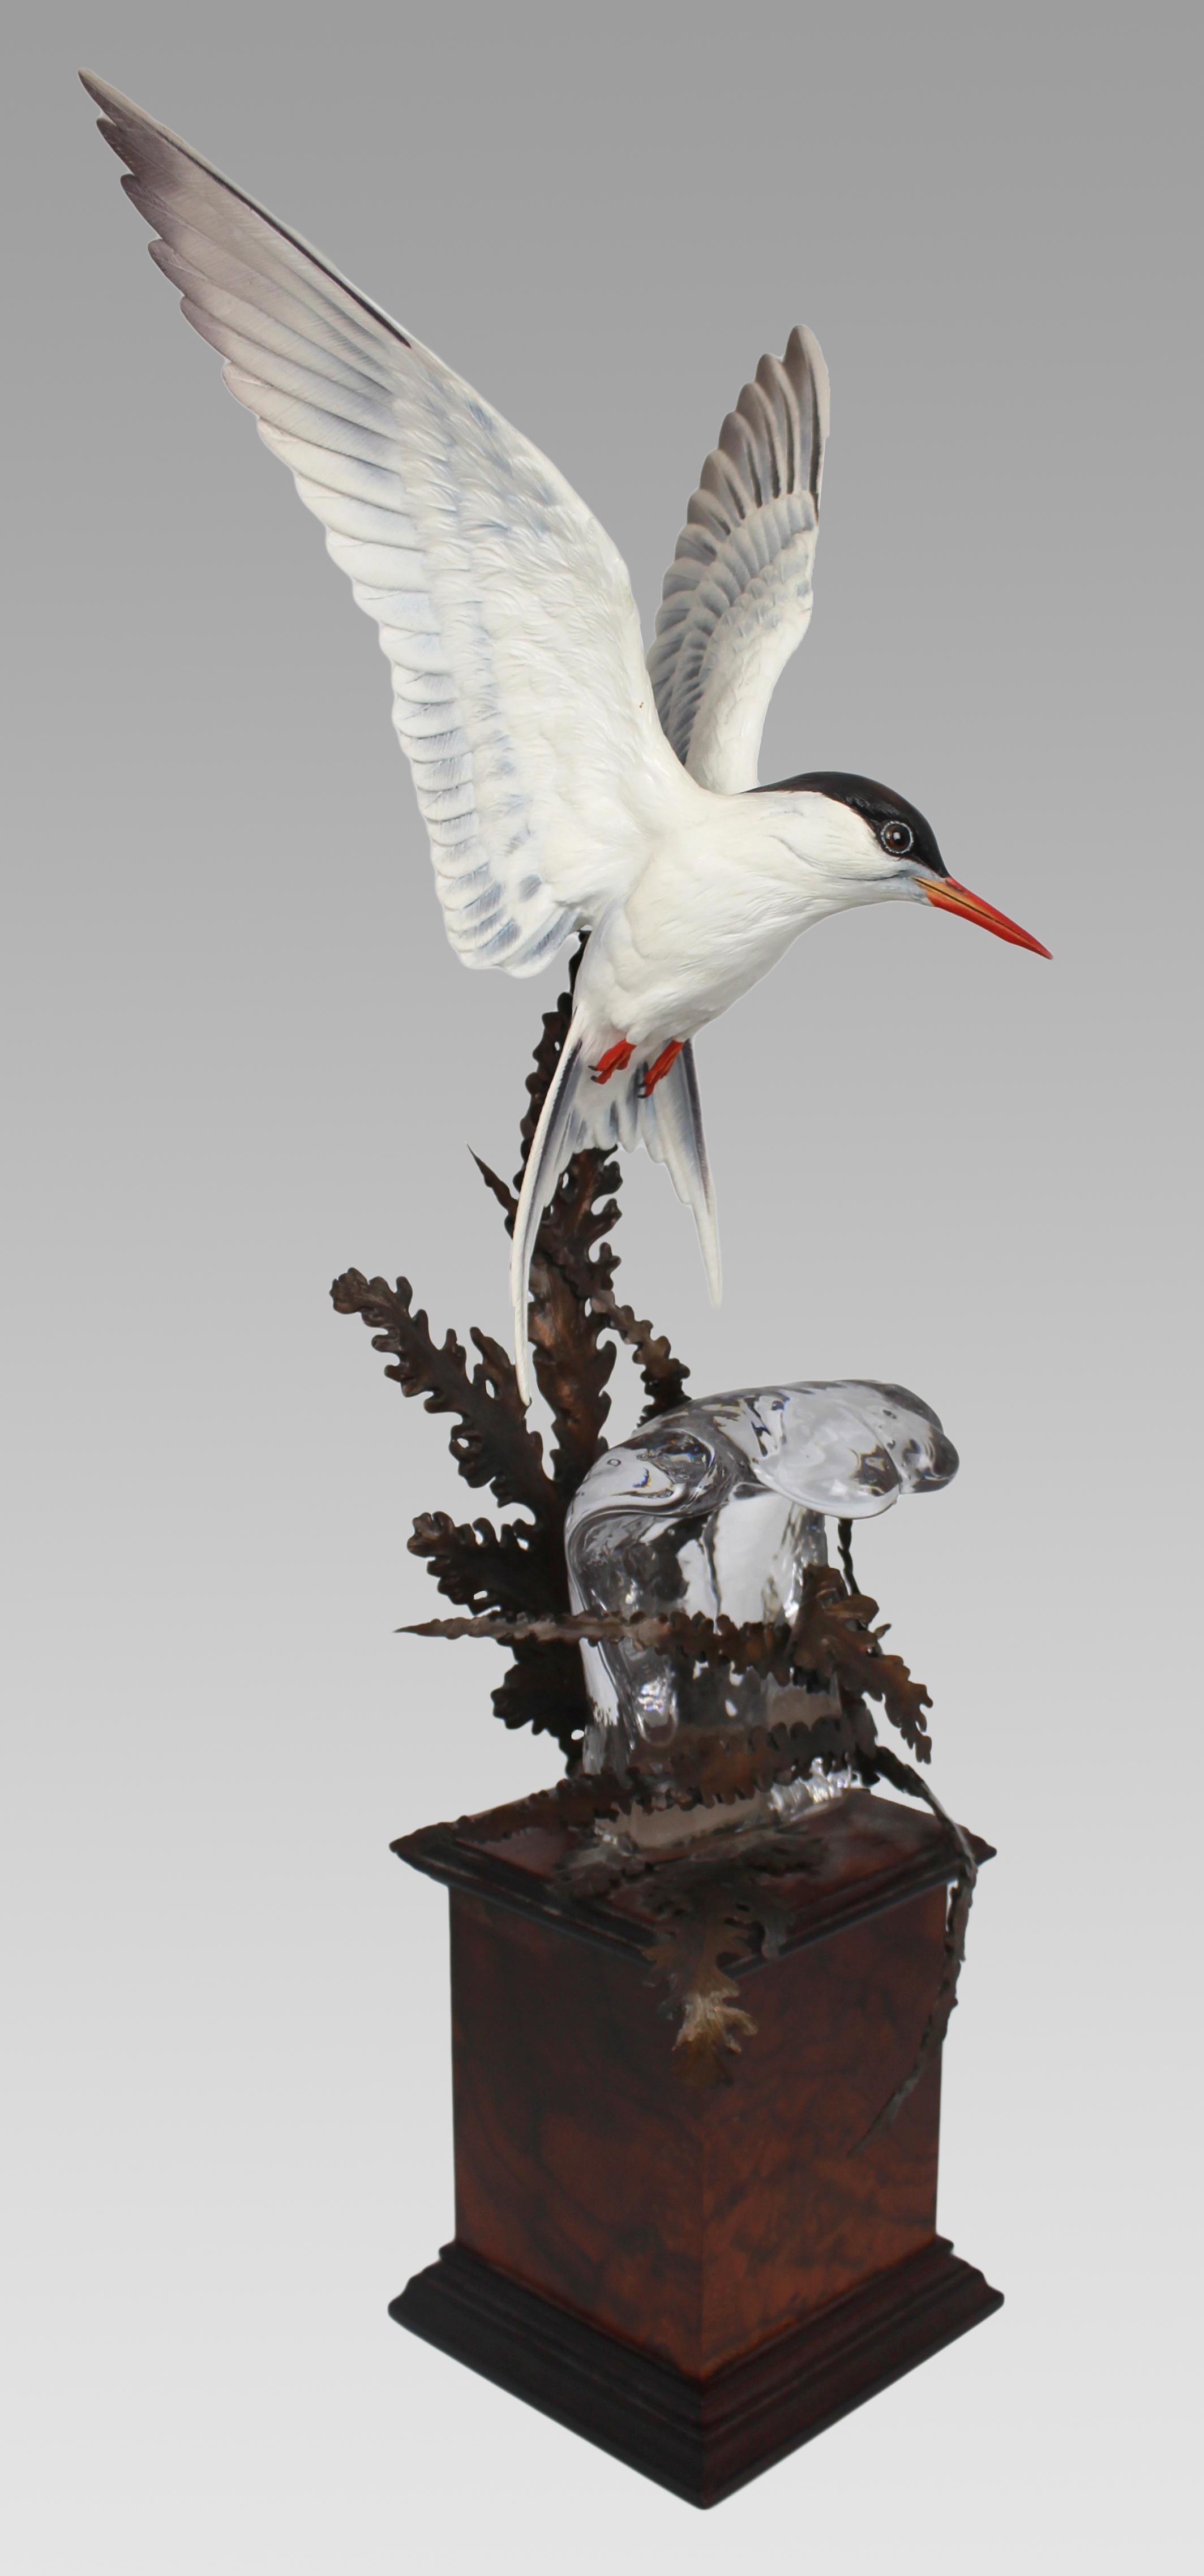 Albany Worcester David Burnham-Smith sculpture Arctic Tern


Modelled by David Burnham-Smith for Albany Fine China Ltd England, Worcester

